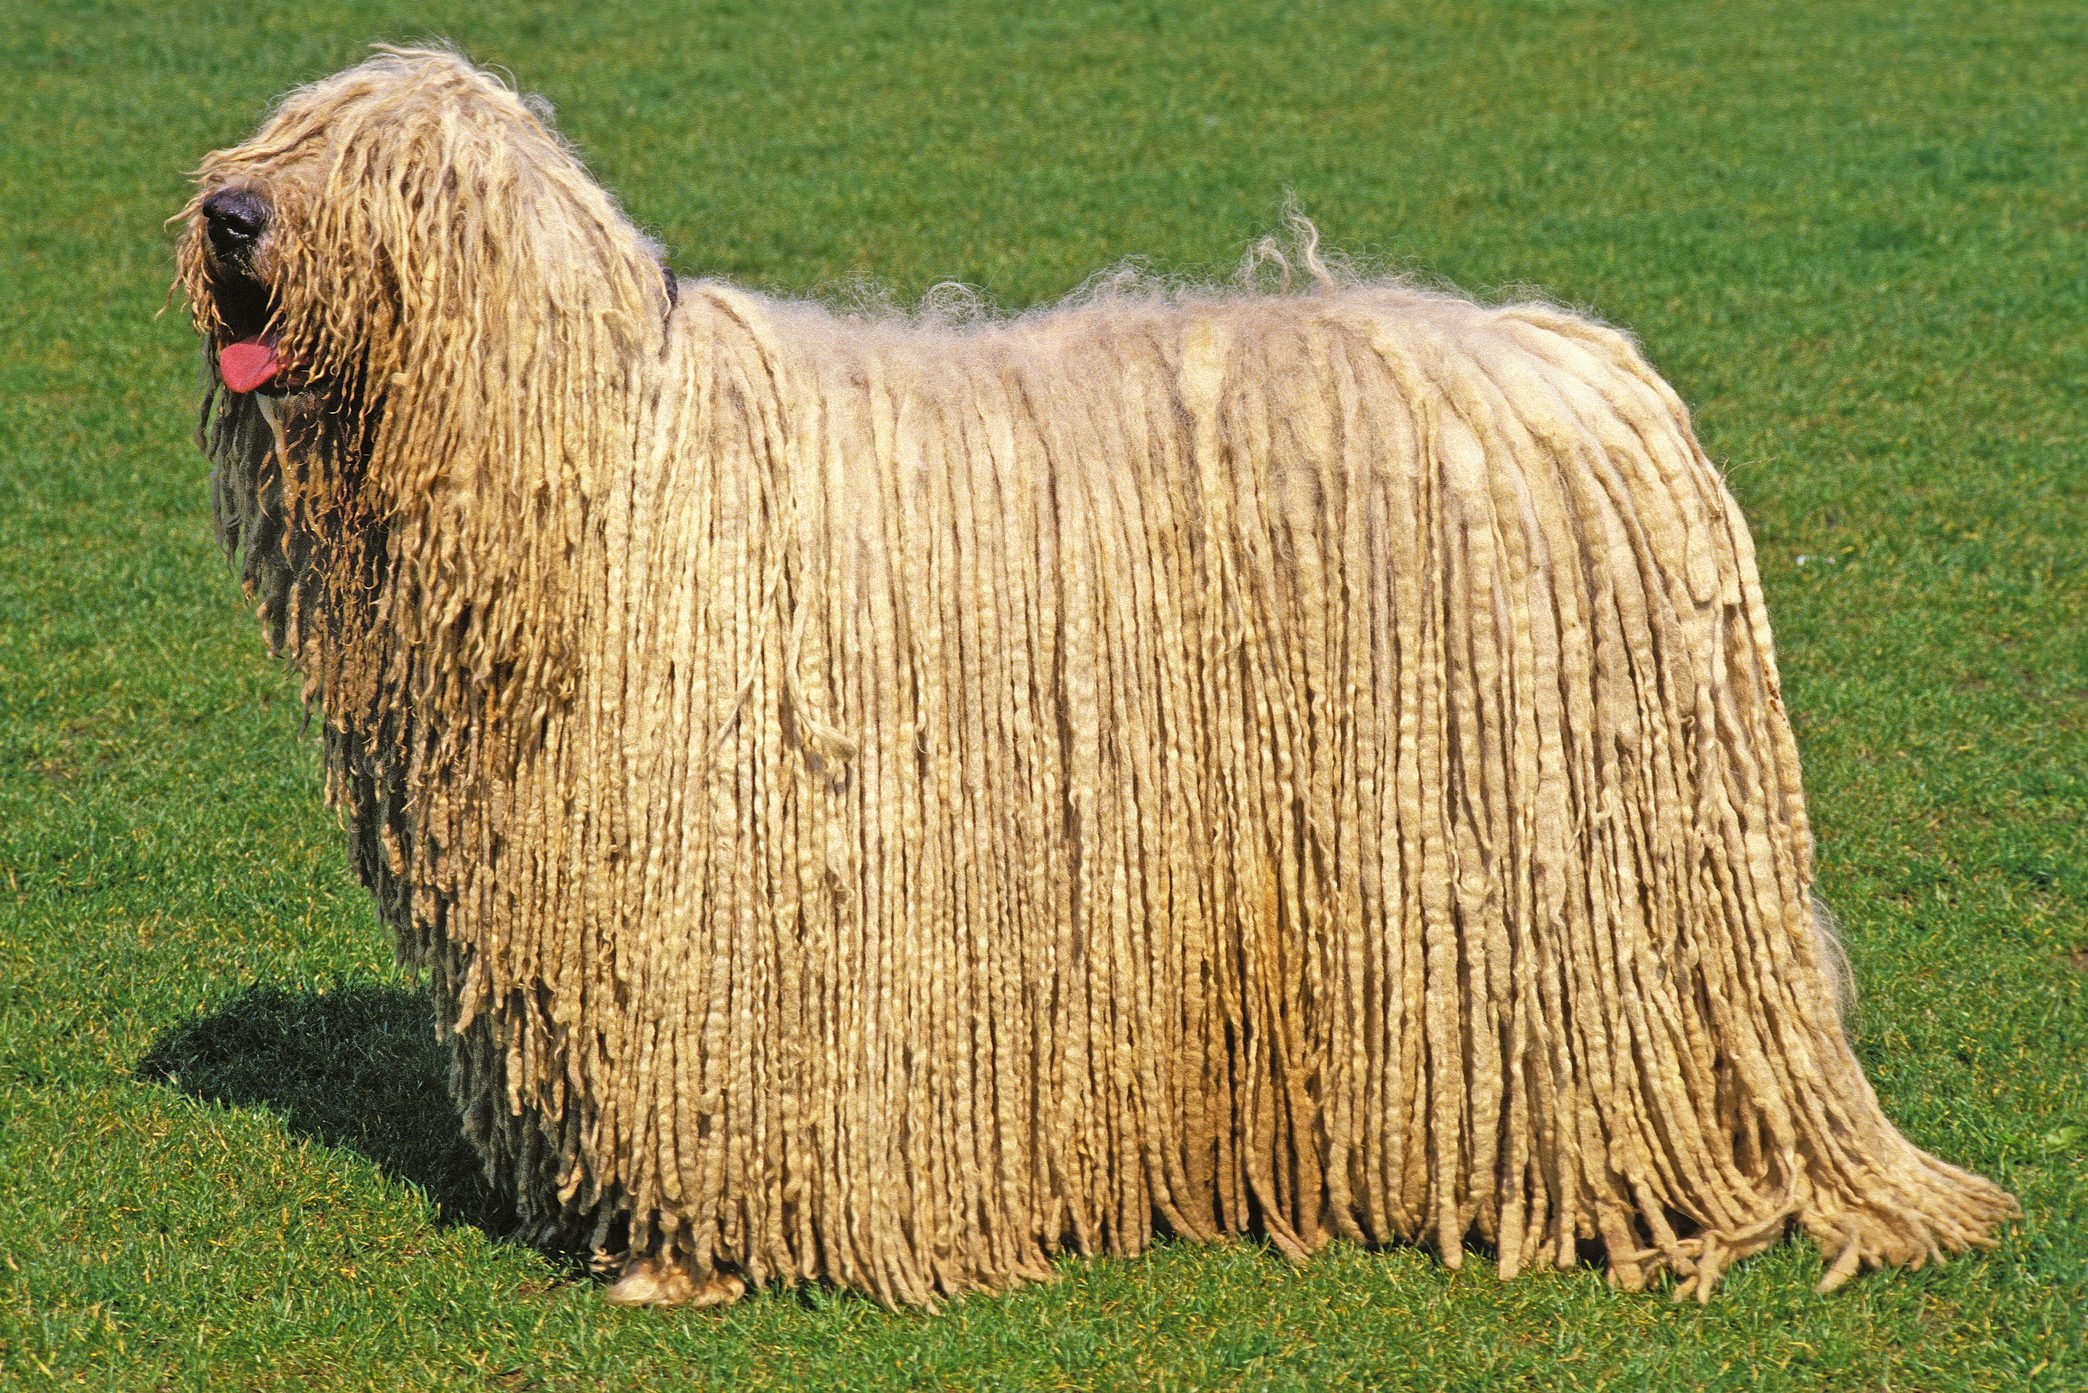 6 Adorable Dogs That Look Like A Mop